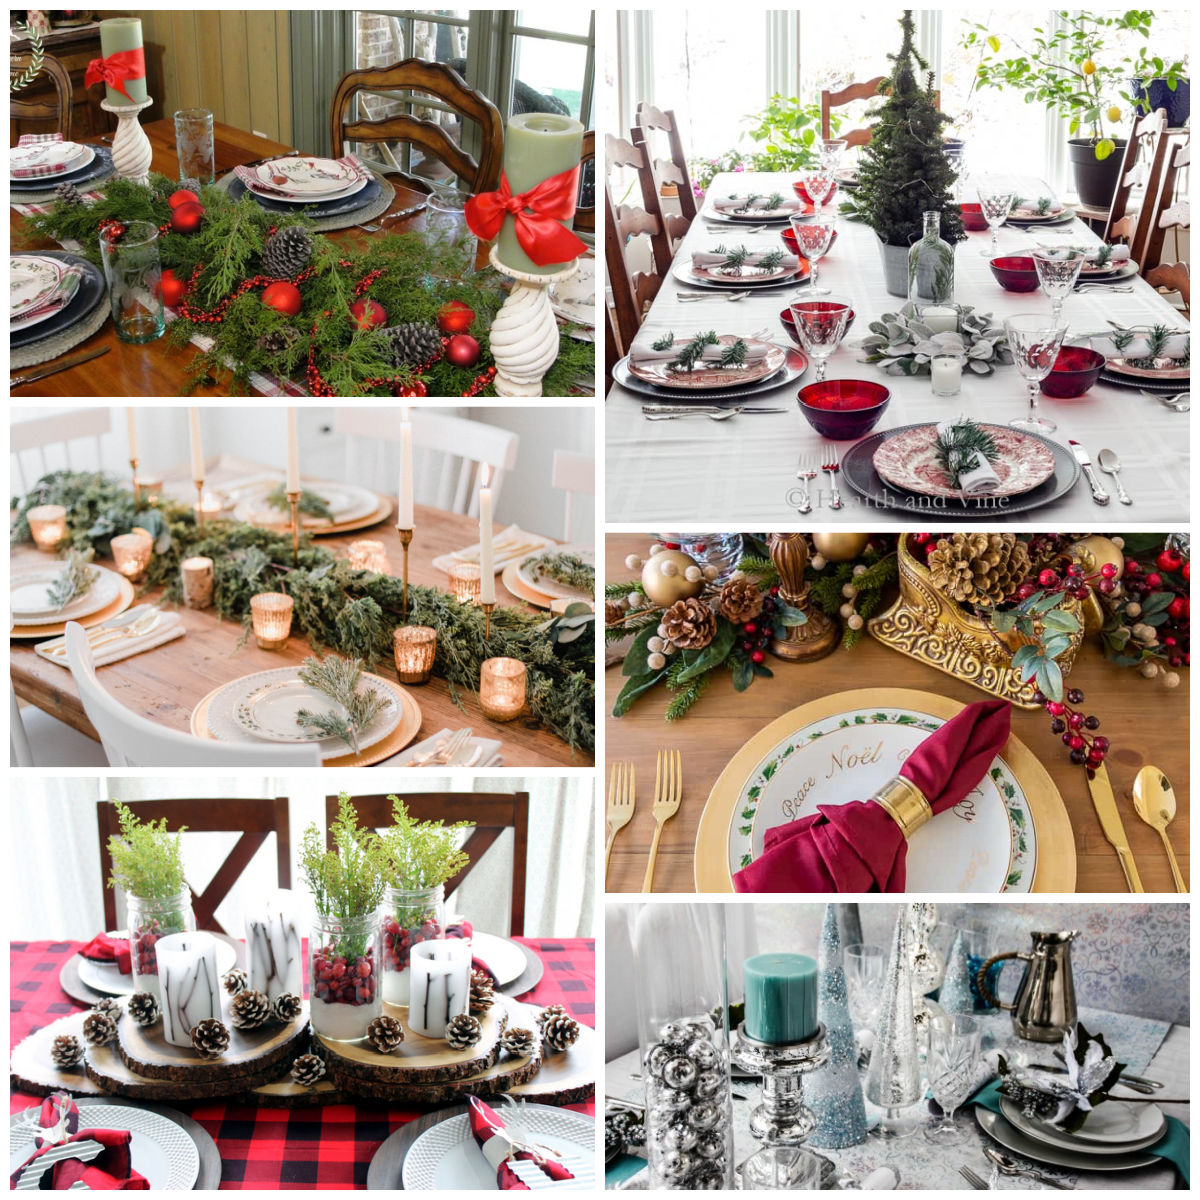 A collage of six Christmas tablescapes from traditional red and green colors to silver and blue.